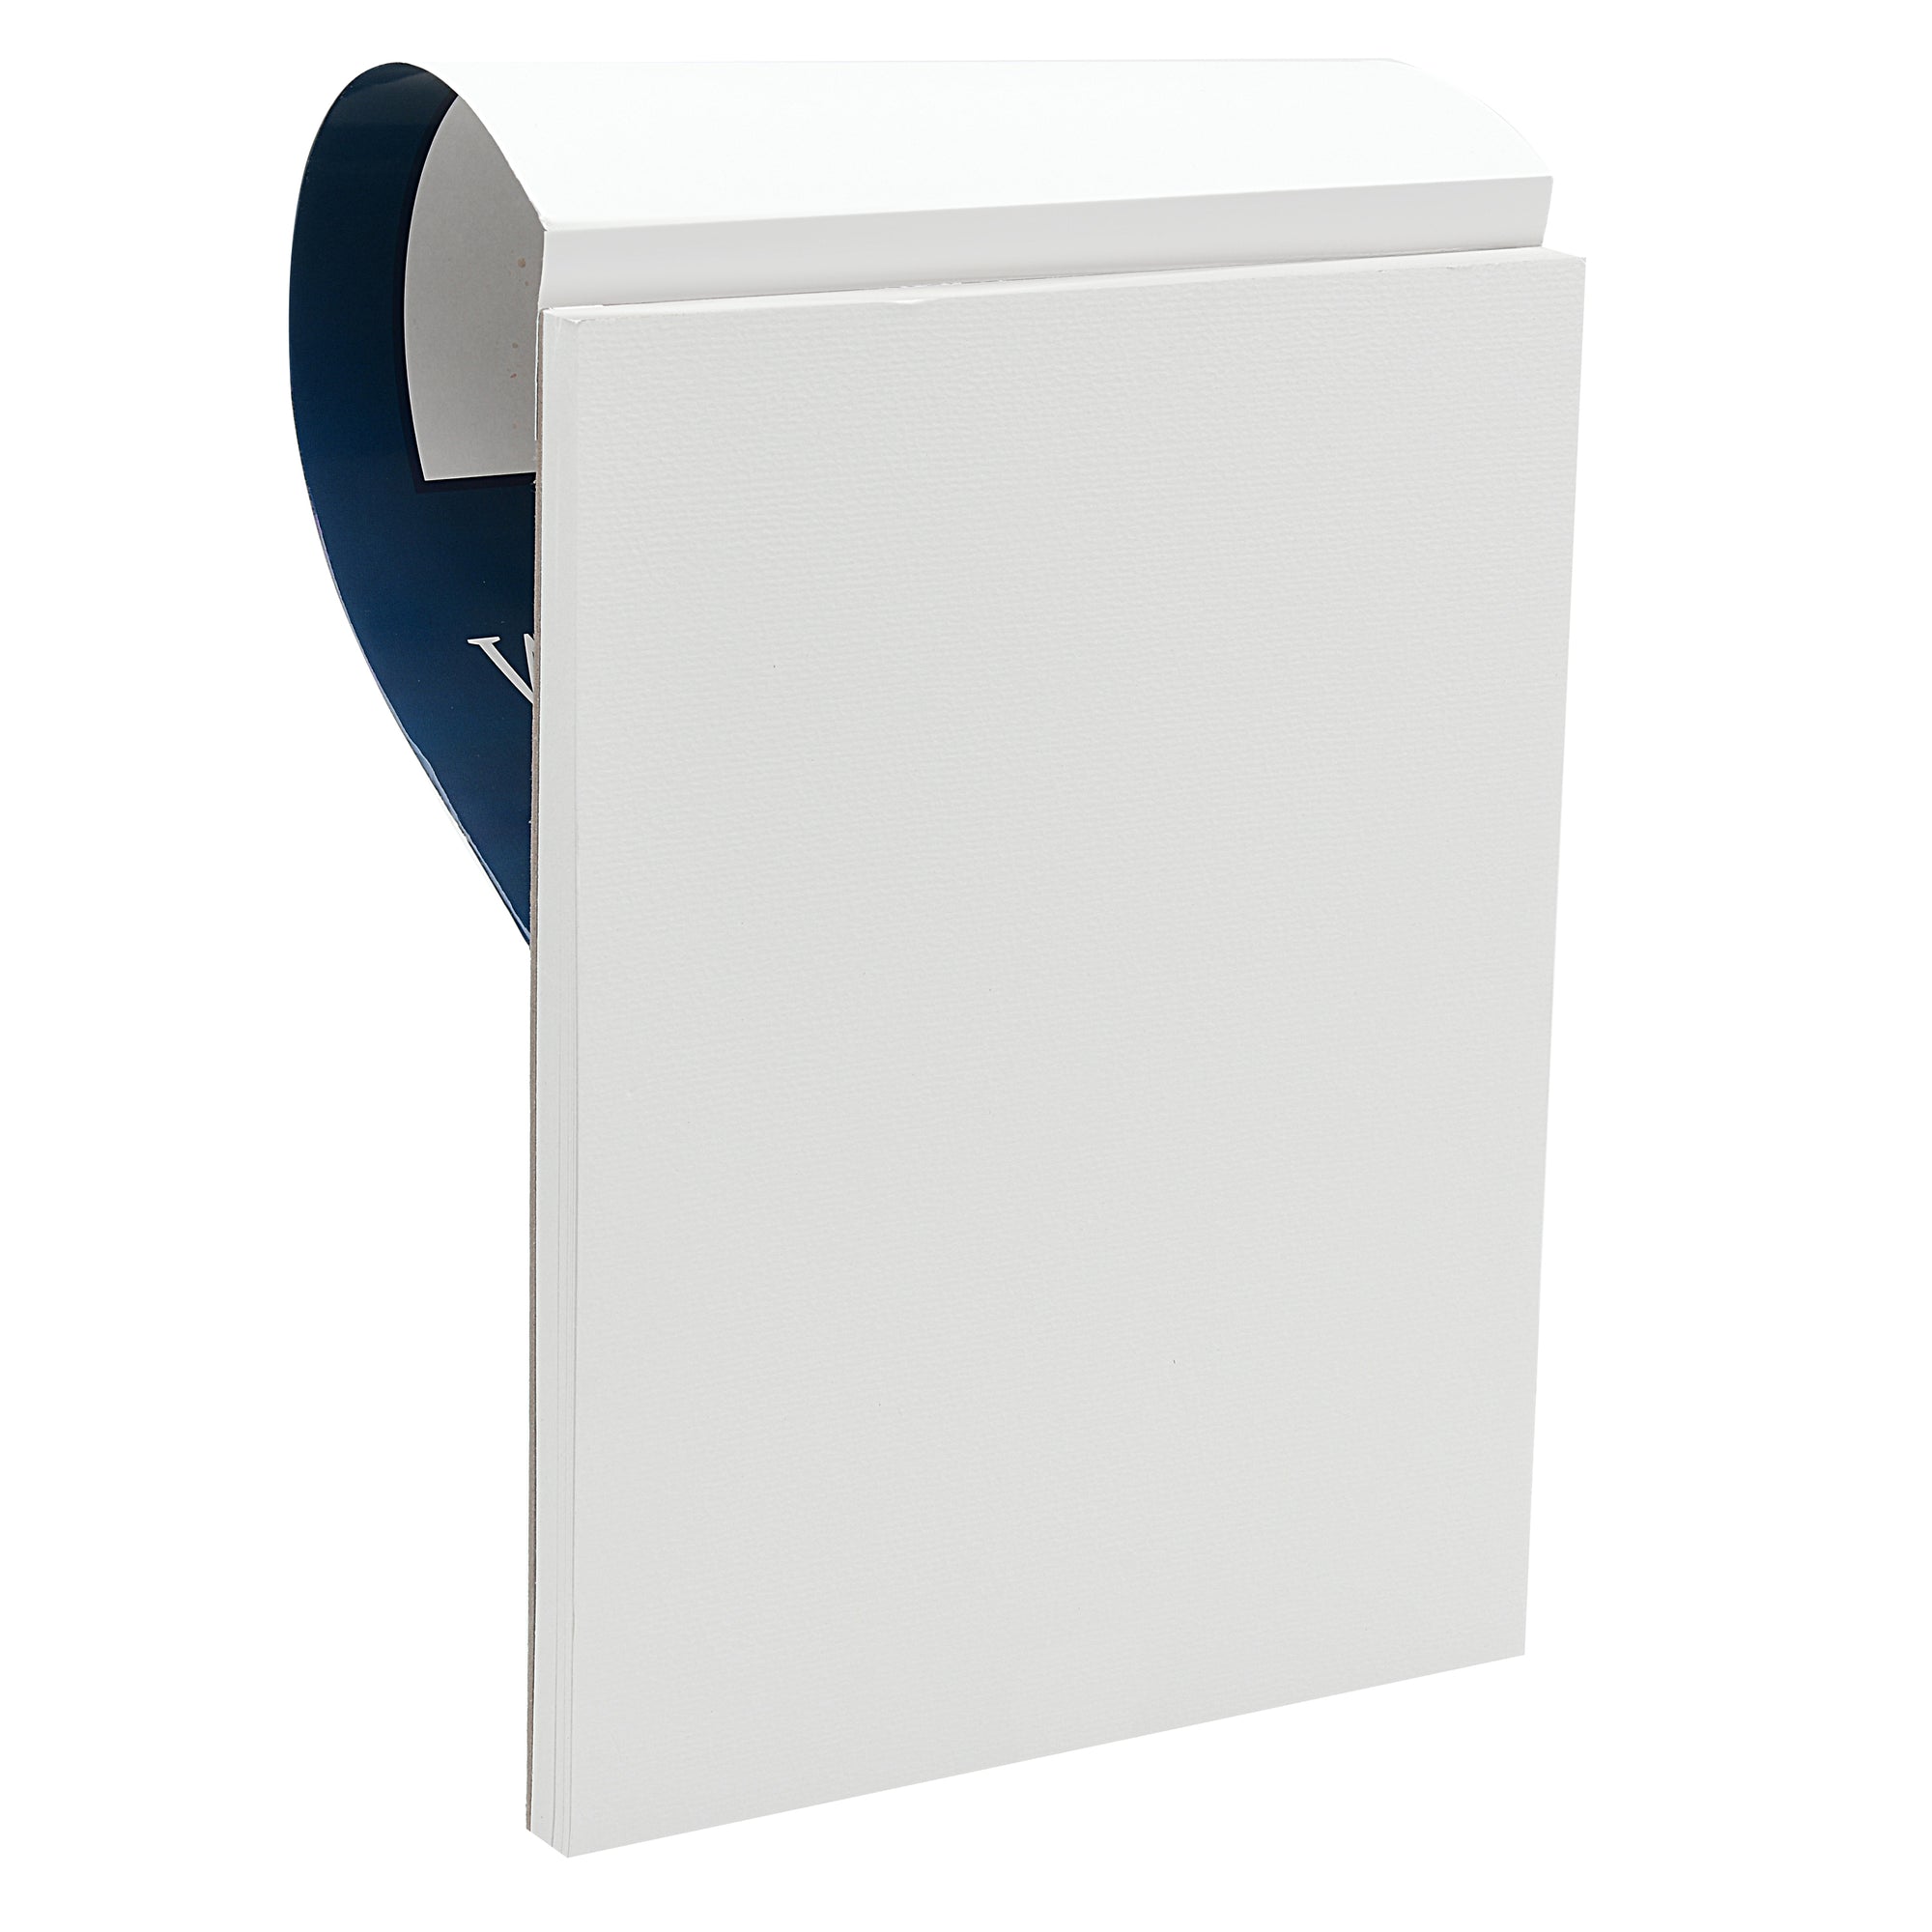 Acrylic Paper Pads (Set of 2), 12 Acrylic Sheets 9x12 inch